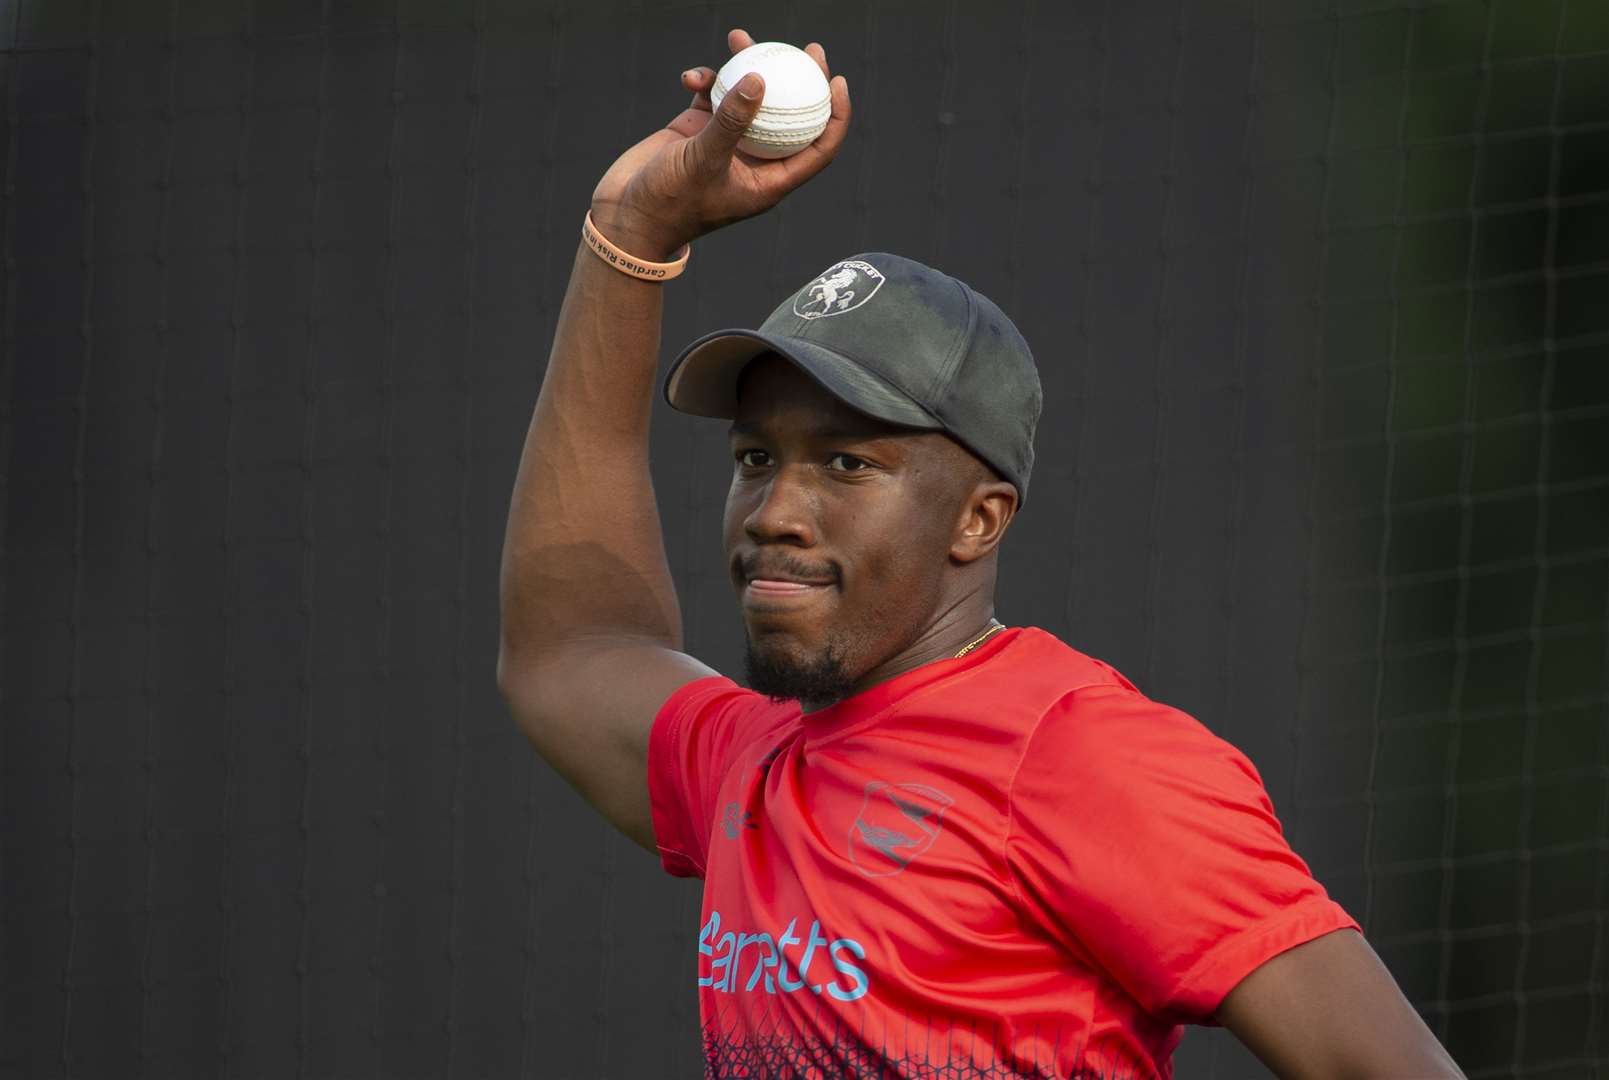 Kent's Daniel Bell-Drummond. Picture: Ady Kerry